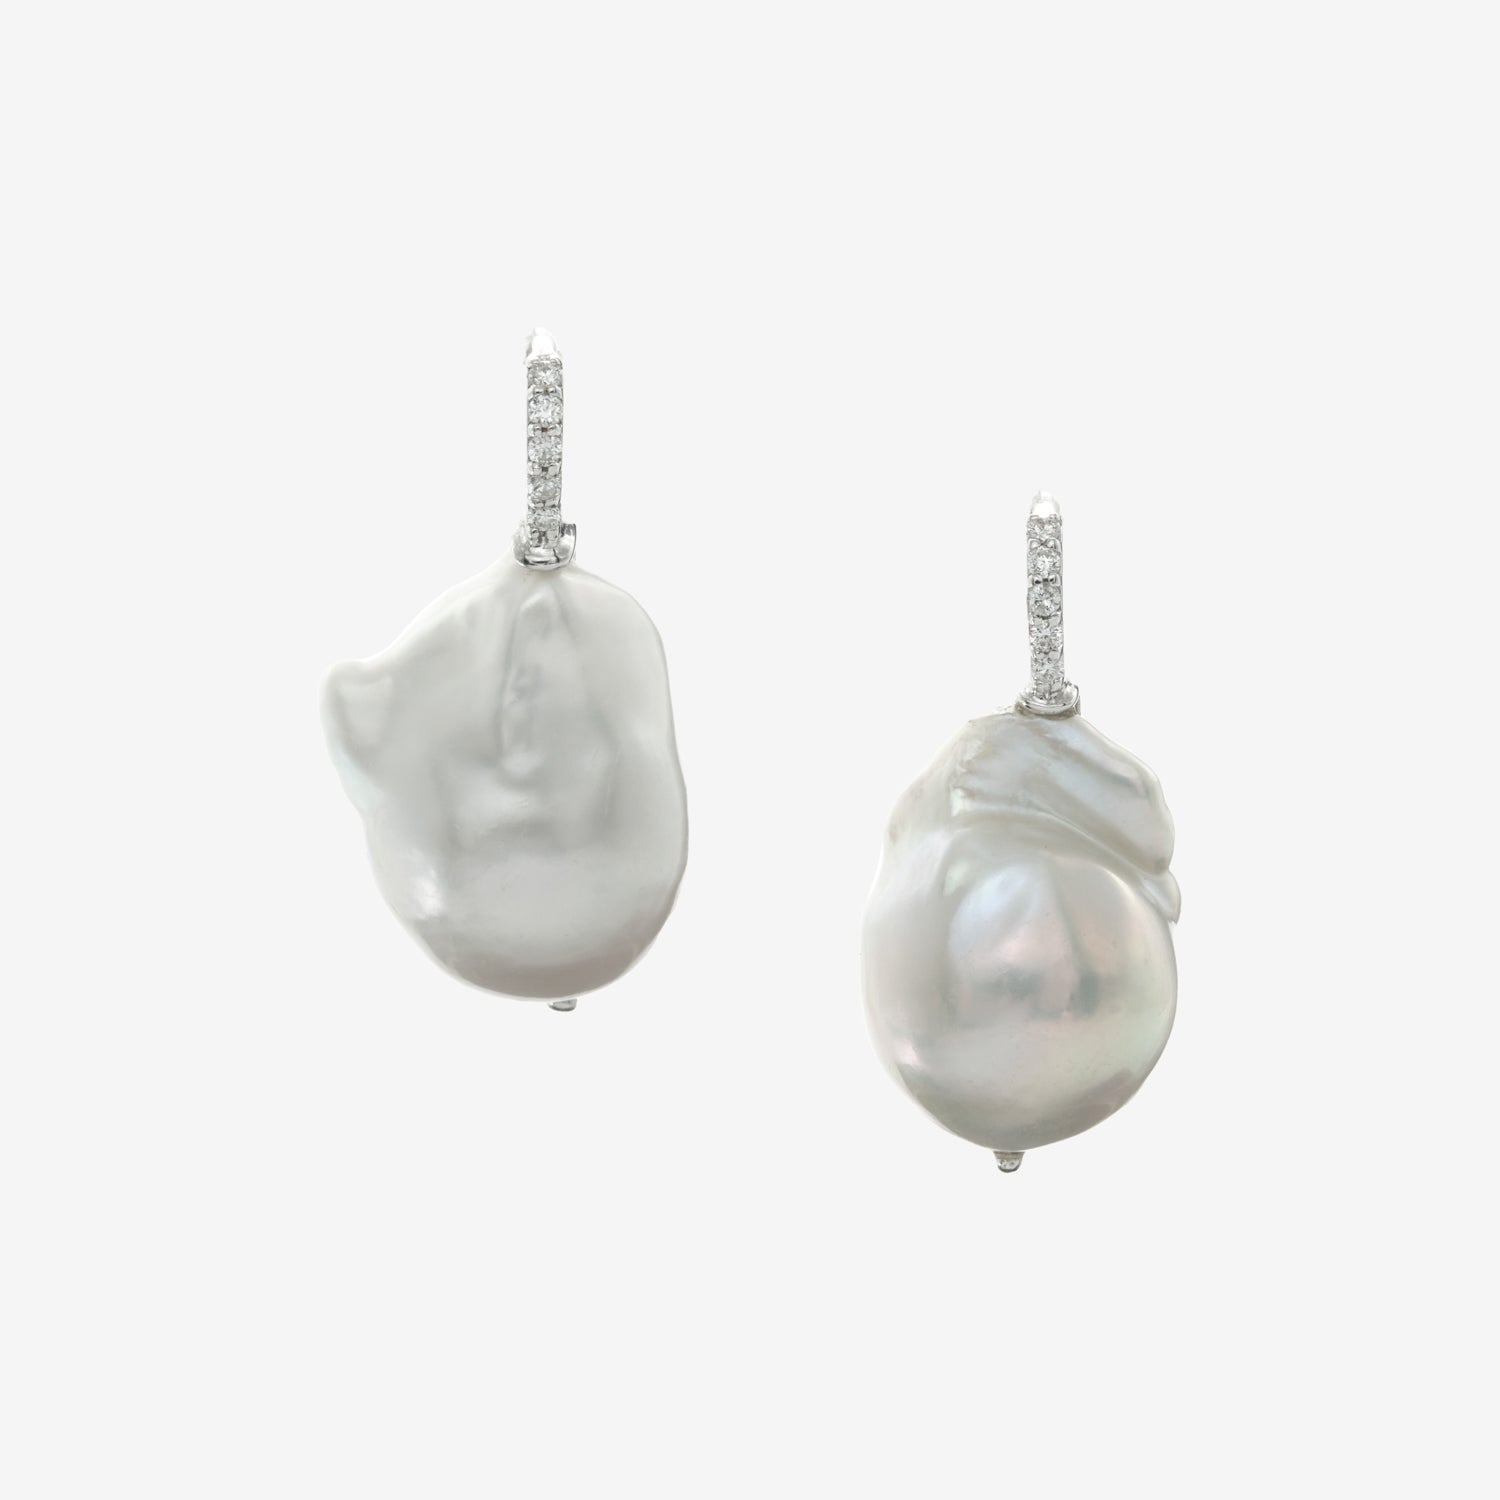 EARRINGS WITH BAROQUE PEARLS AND DIAMONDS